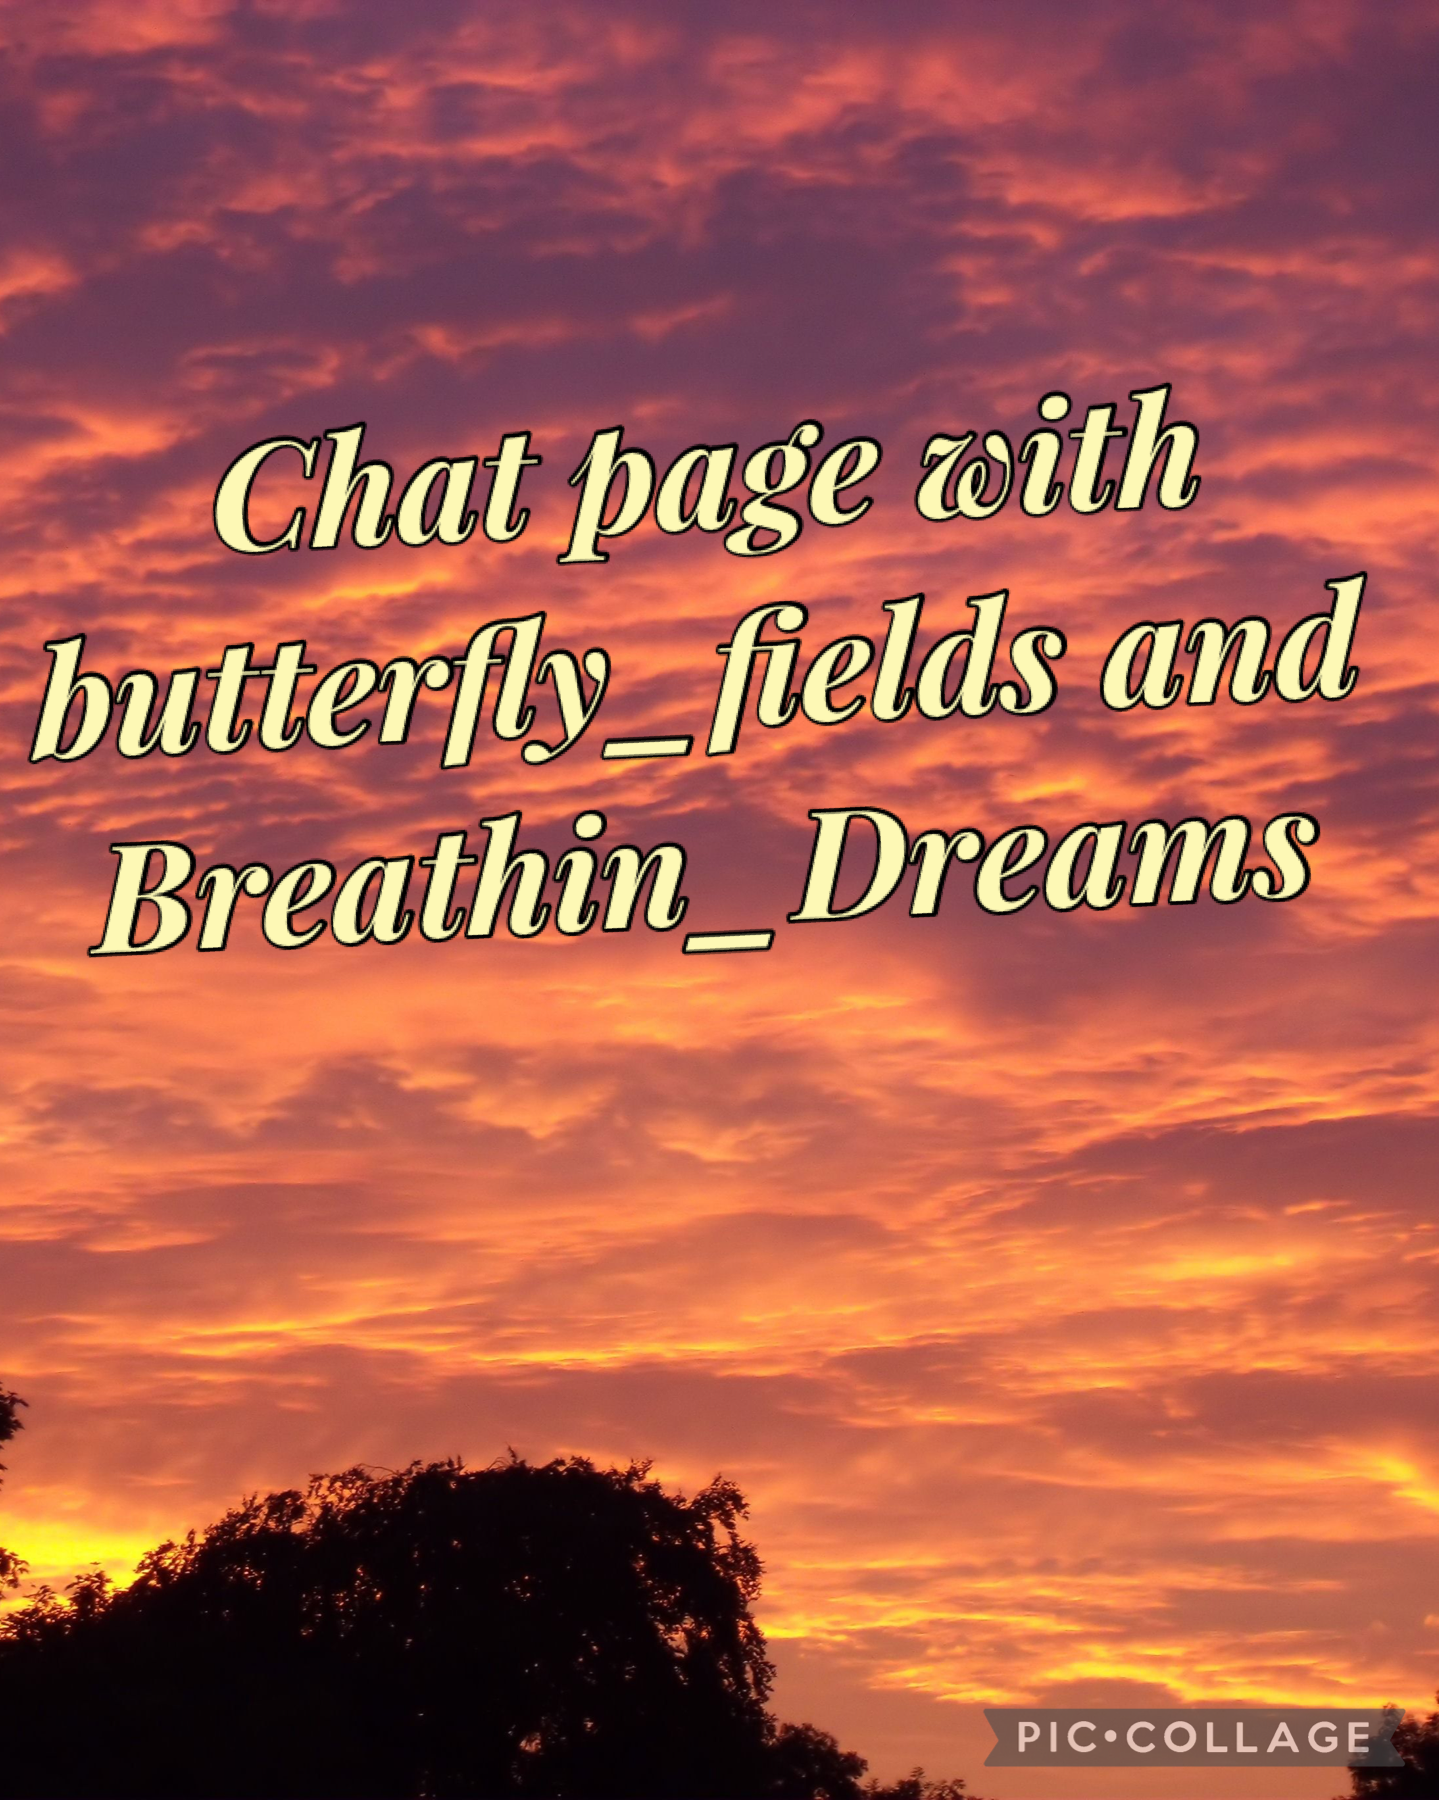 4.11.21 Chat page with butterfly_fields 